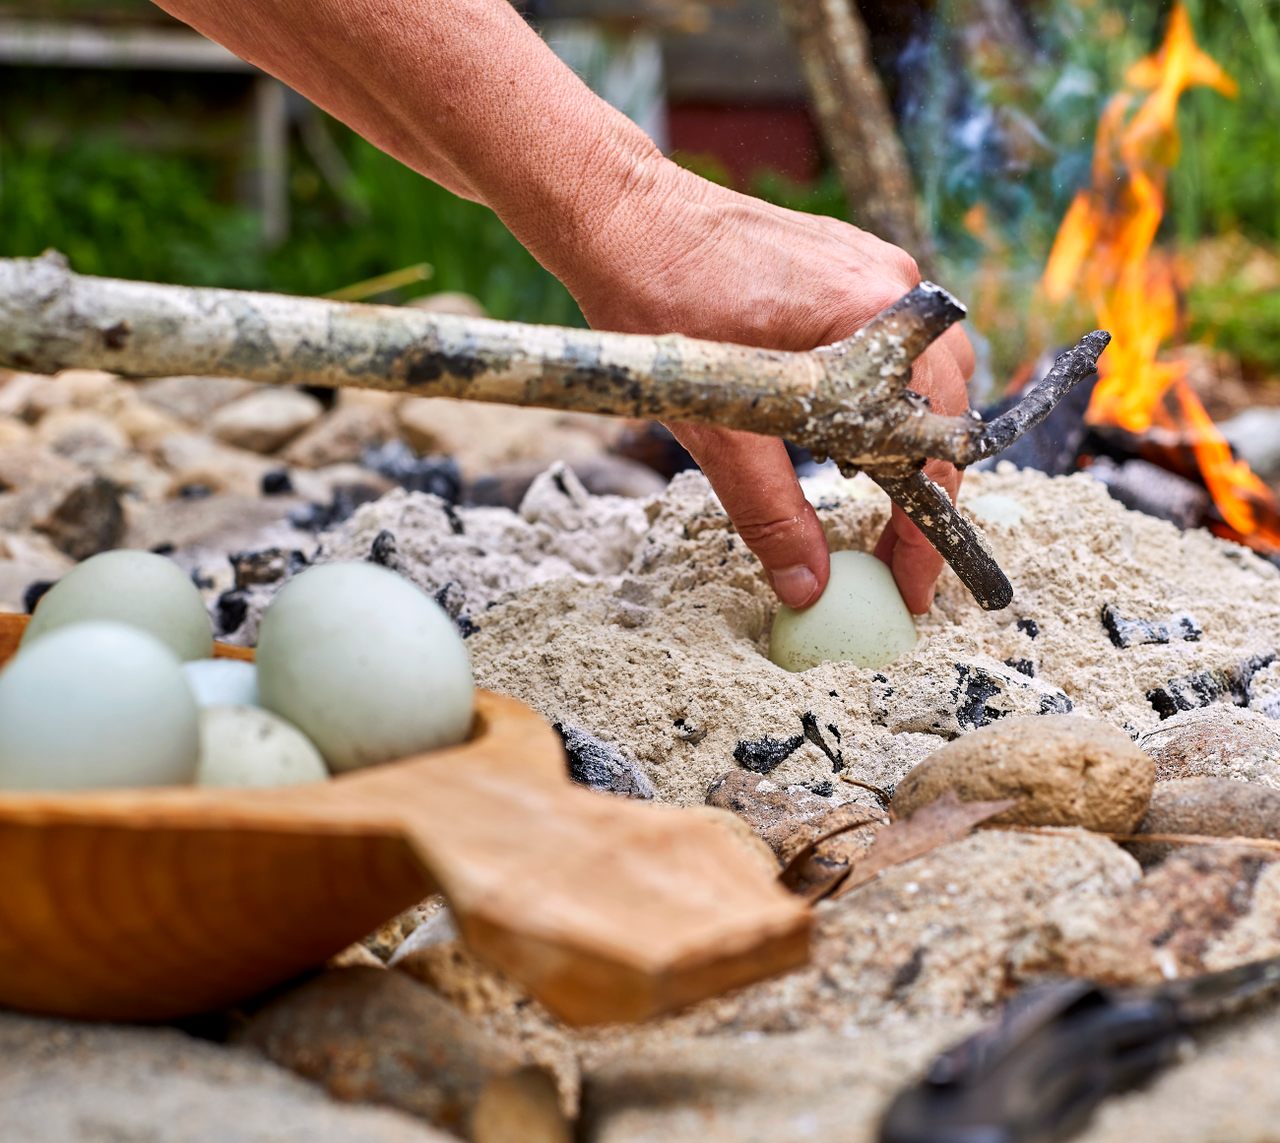 Egg-roasting was once a common childhood hobby, before parents cooled on letting kids play with fire.